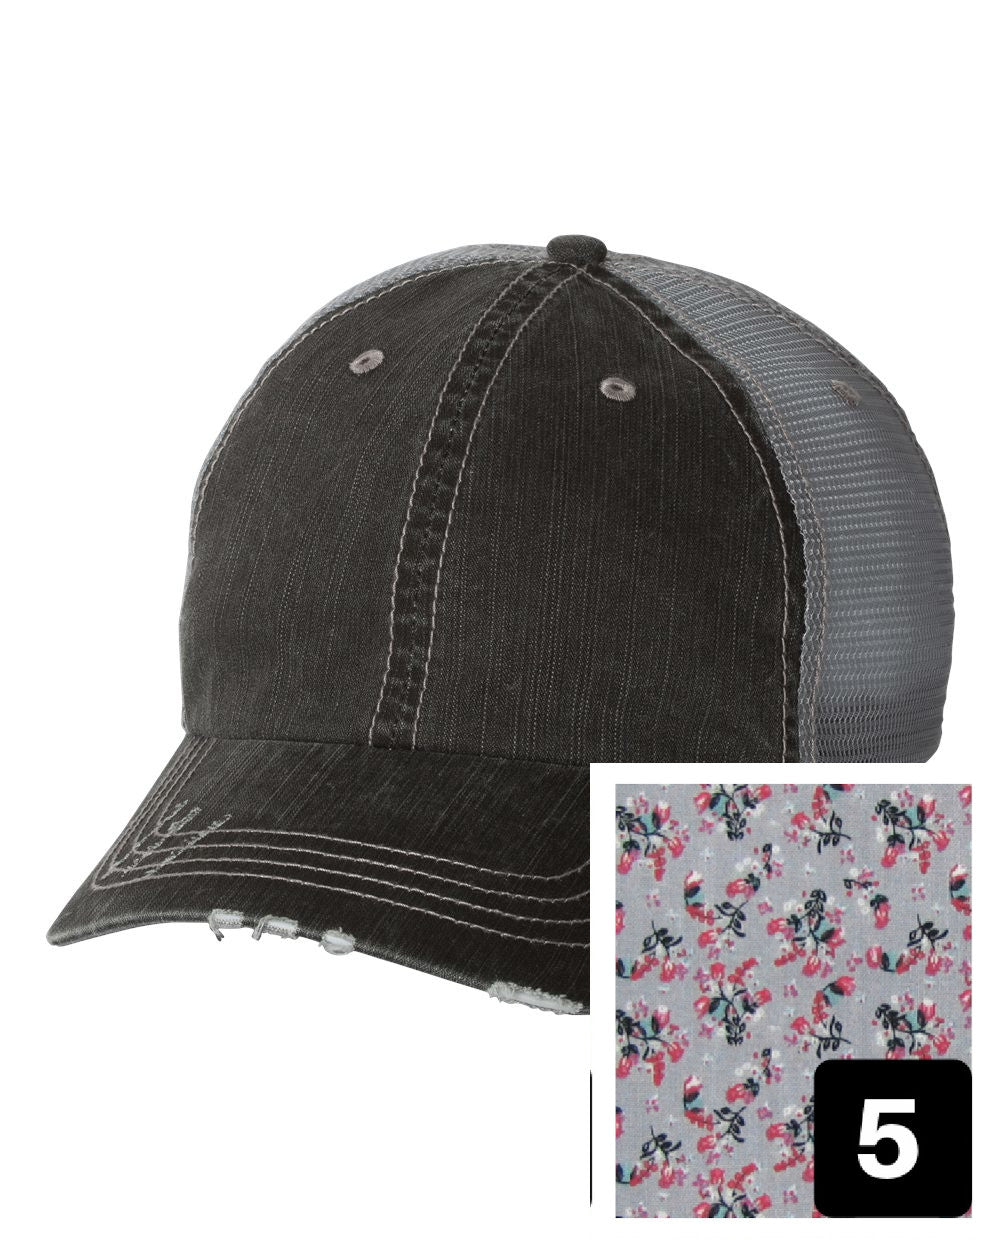 gray distressed trucker hat with purple floral fabric state of Maine